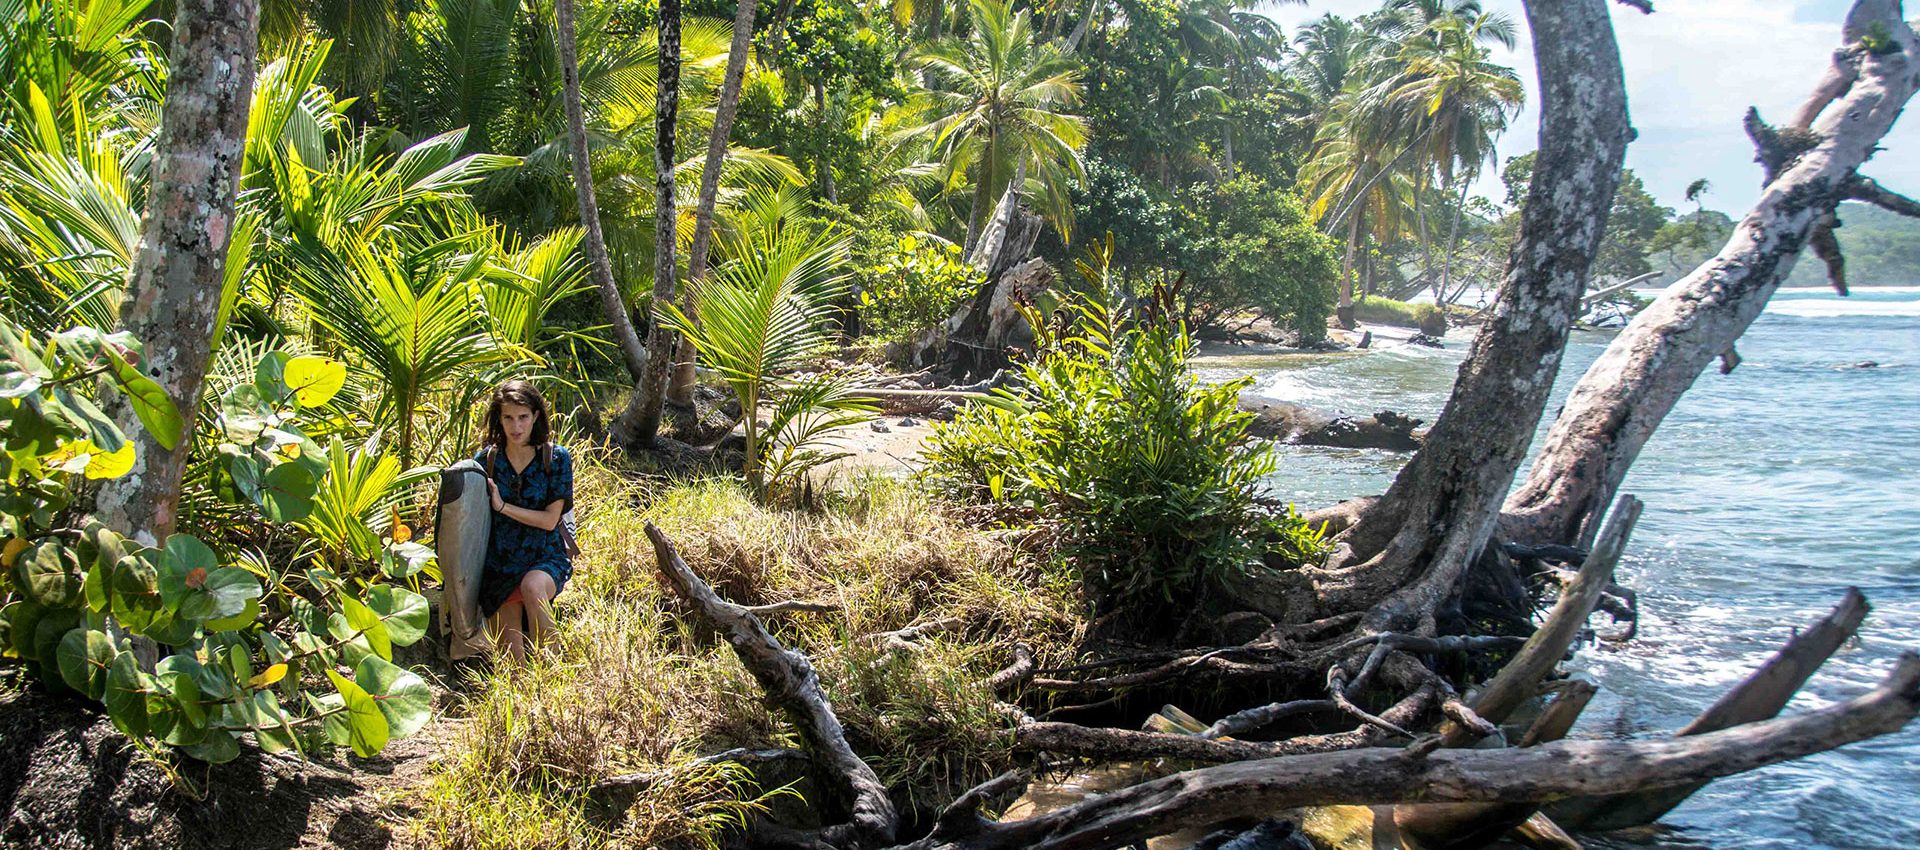 On Isla Bastimentos small trails through the jungle lead to perfect beach breaks.